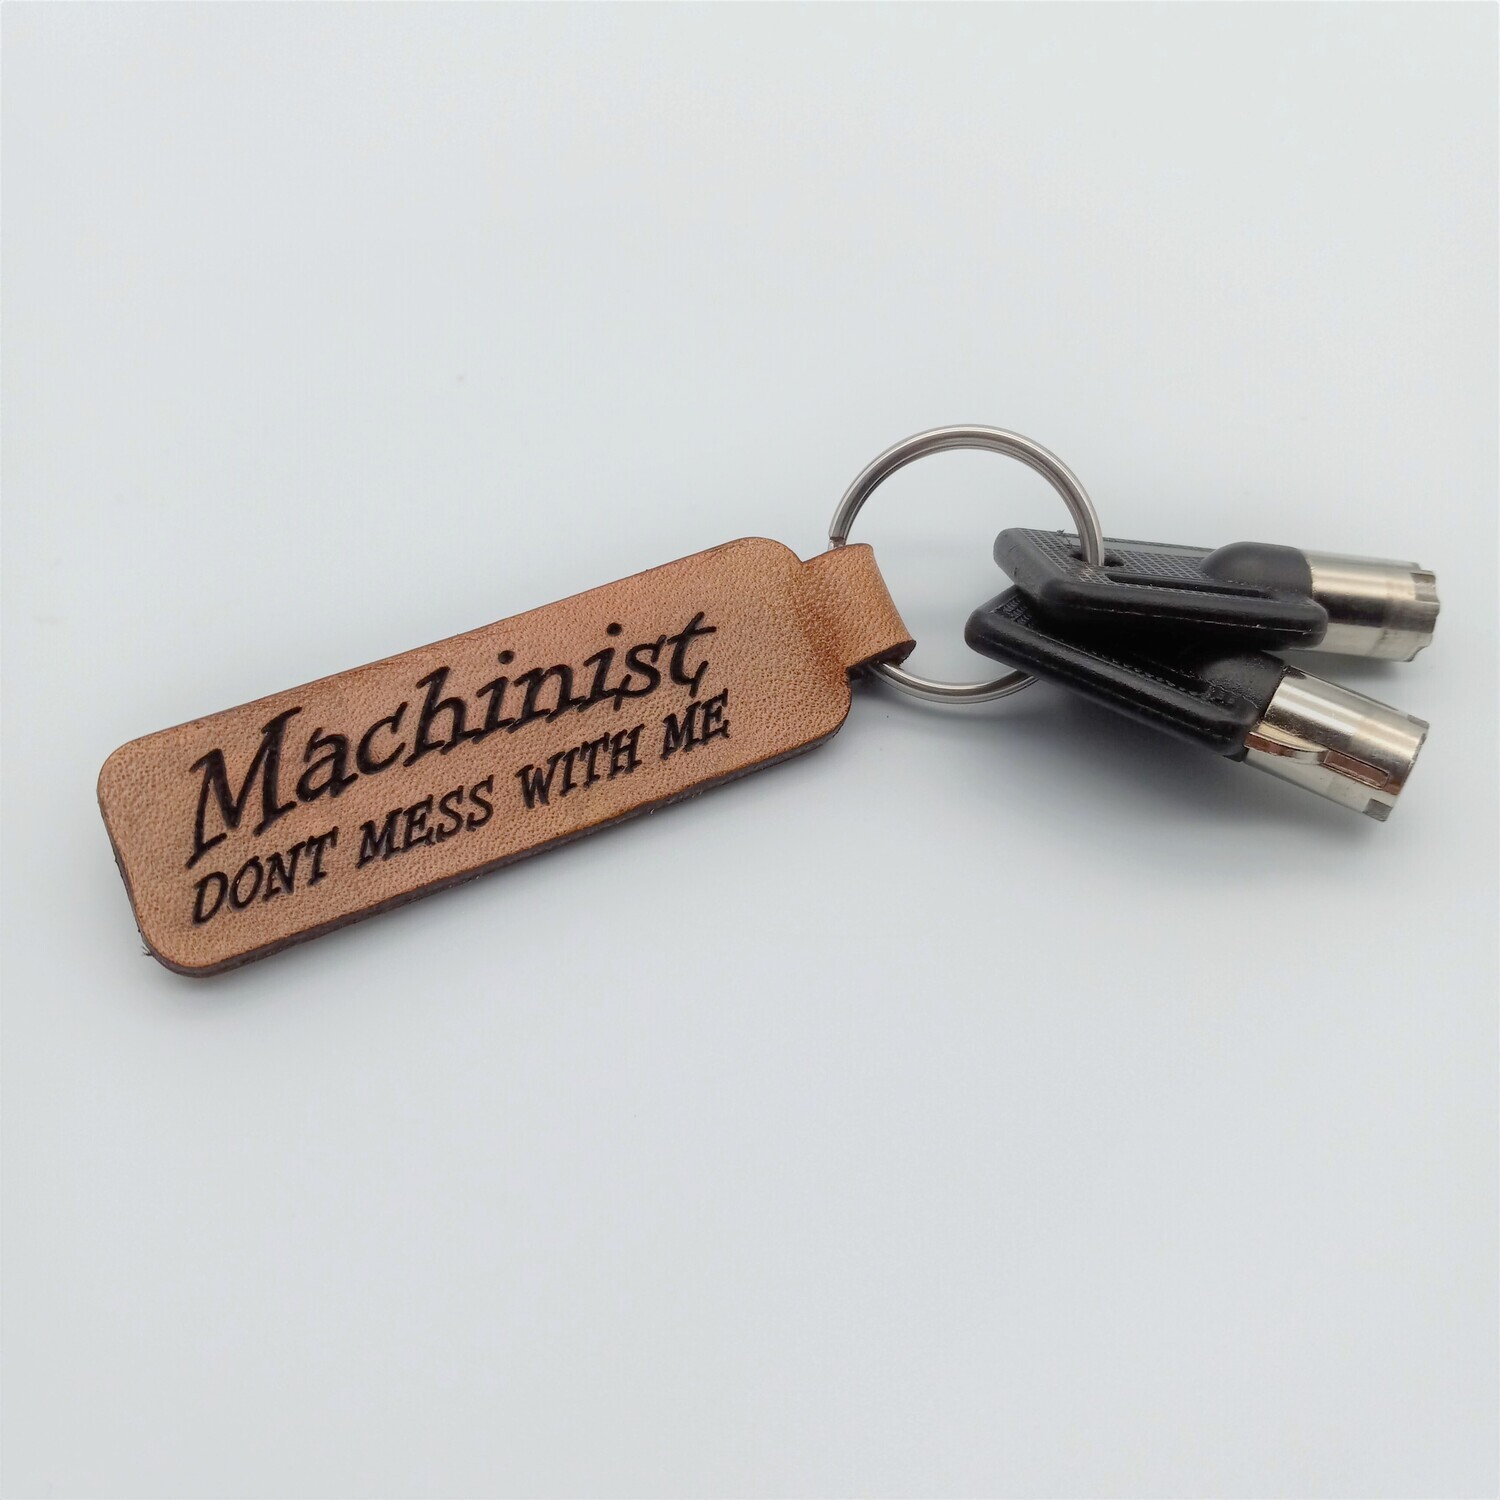 Machinist leather key fob great for tool box keys